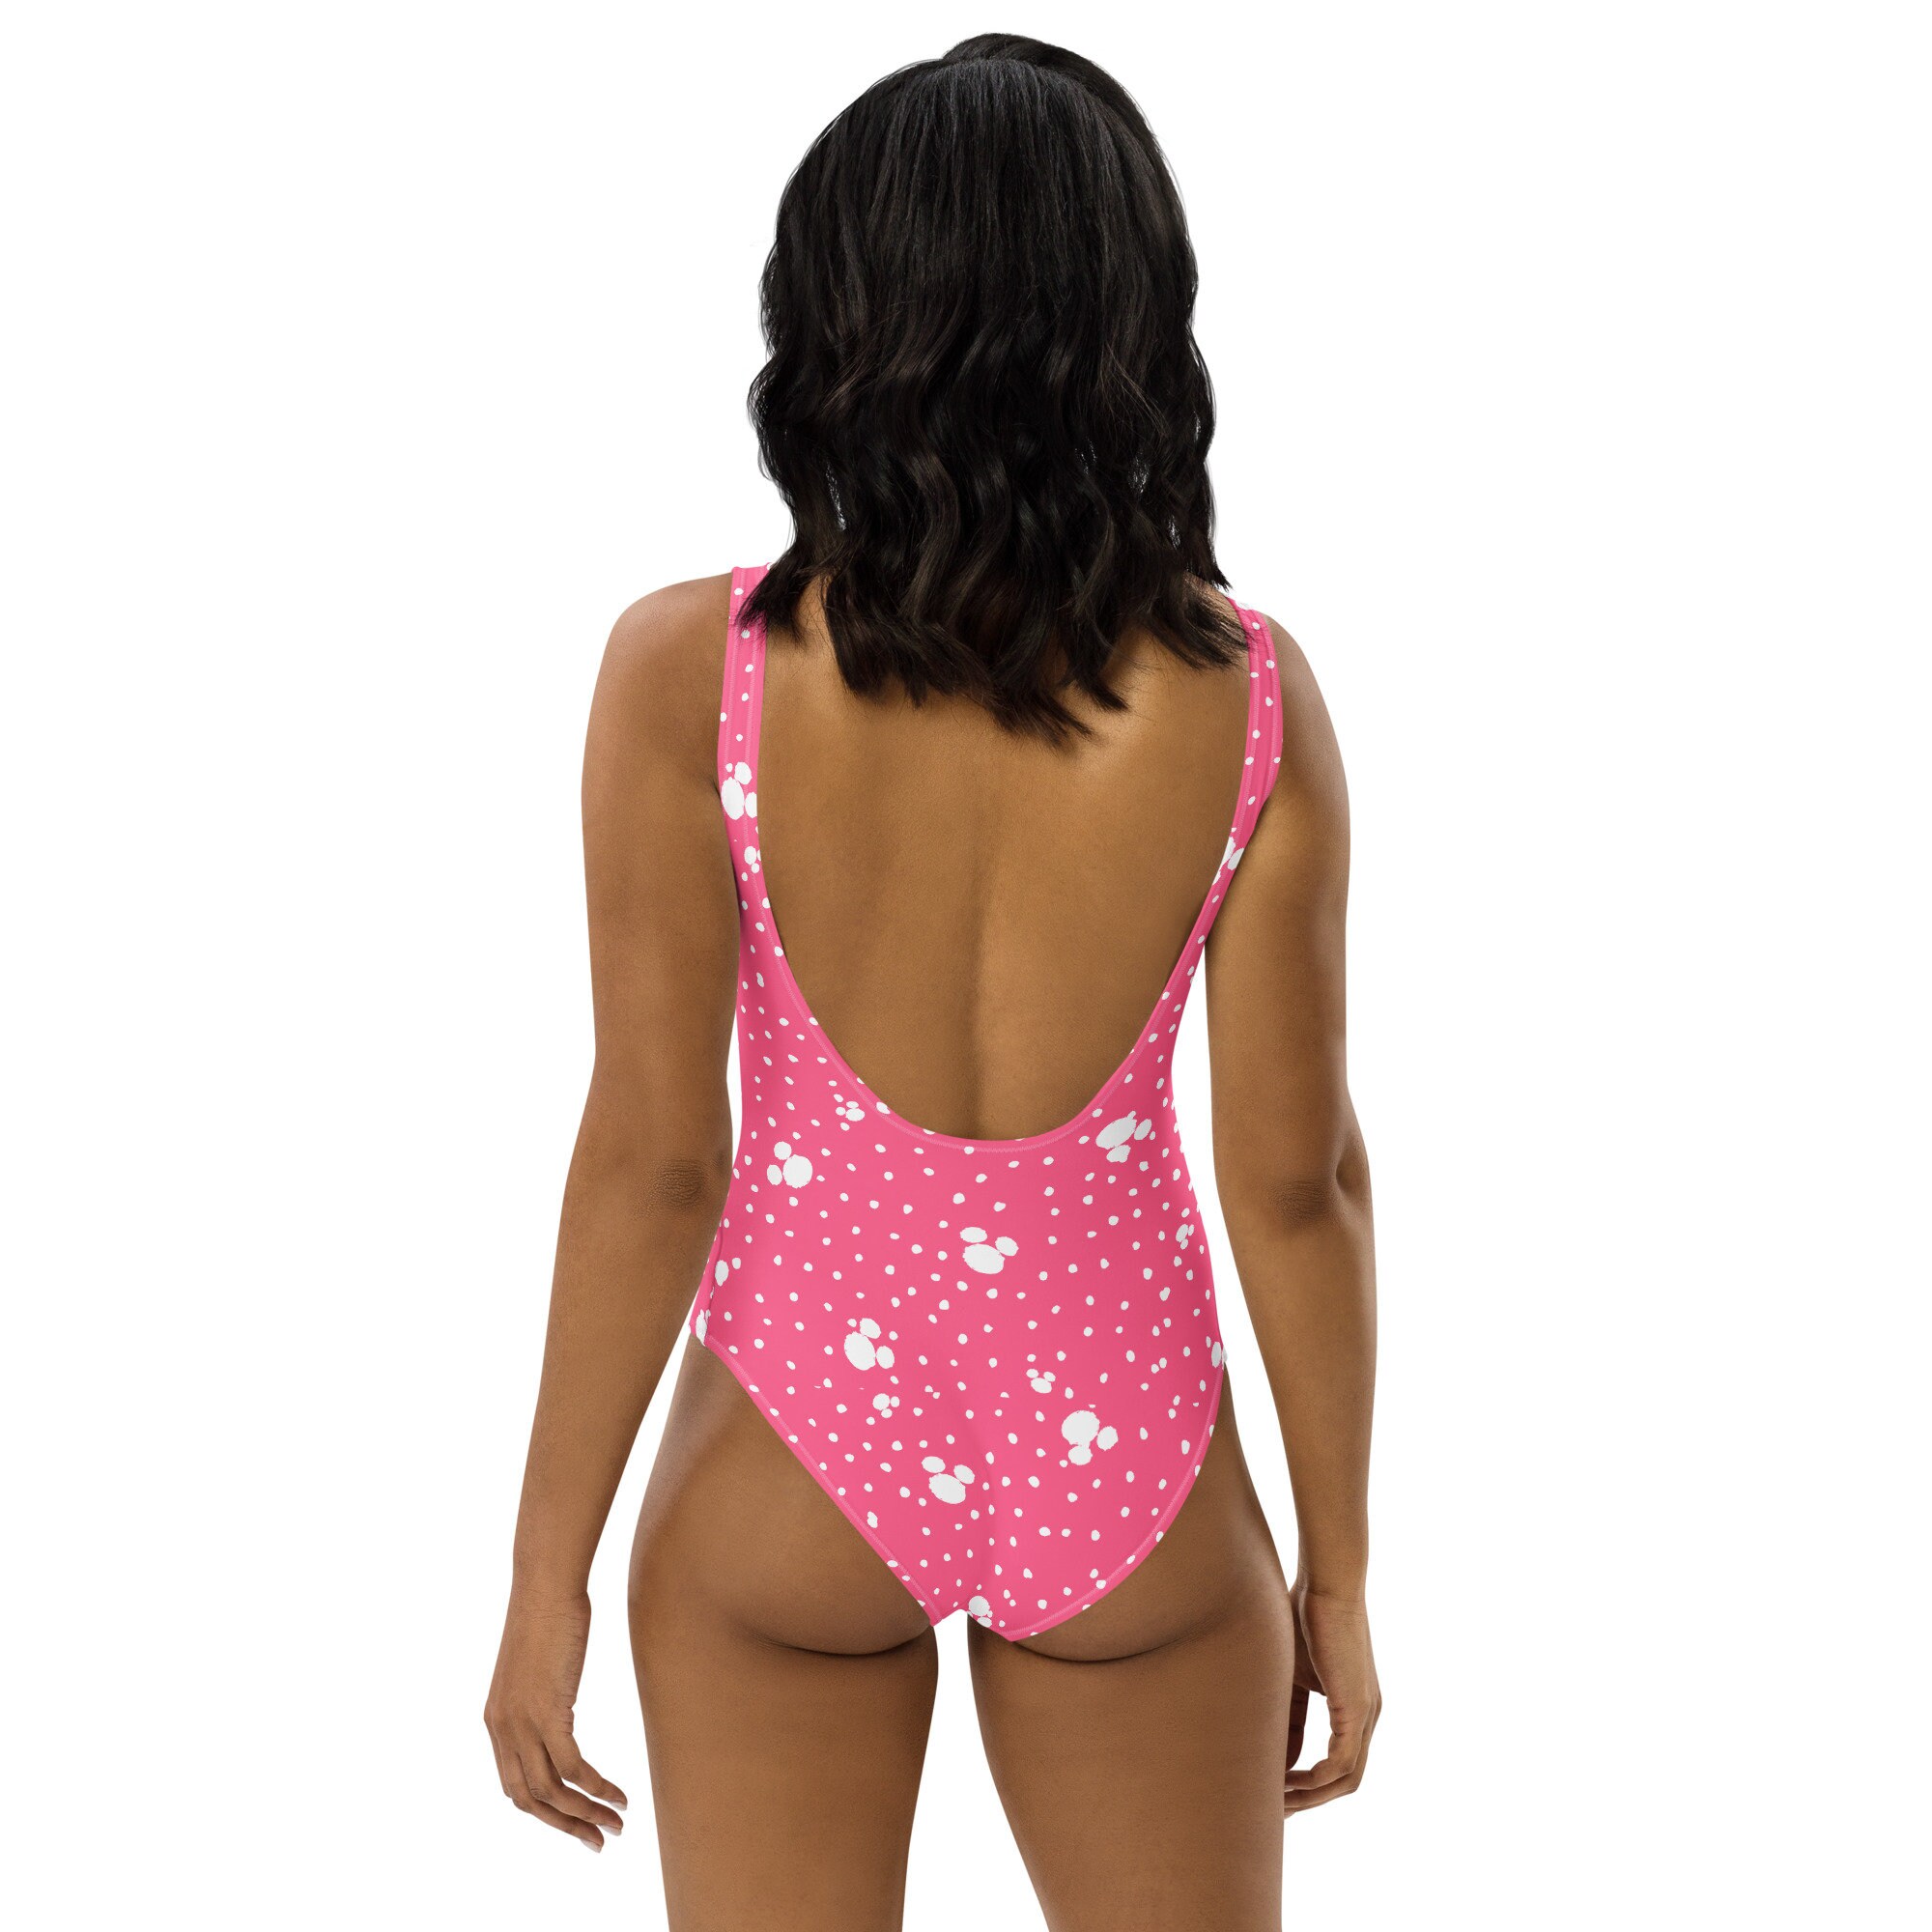 Pink Polka Dot Women's One-Piece Swimsuit, Disney Vacation outfit